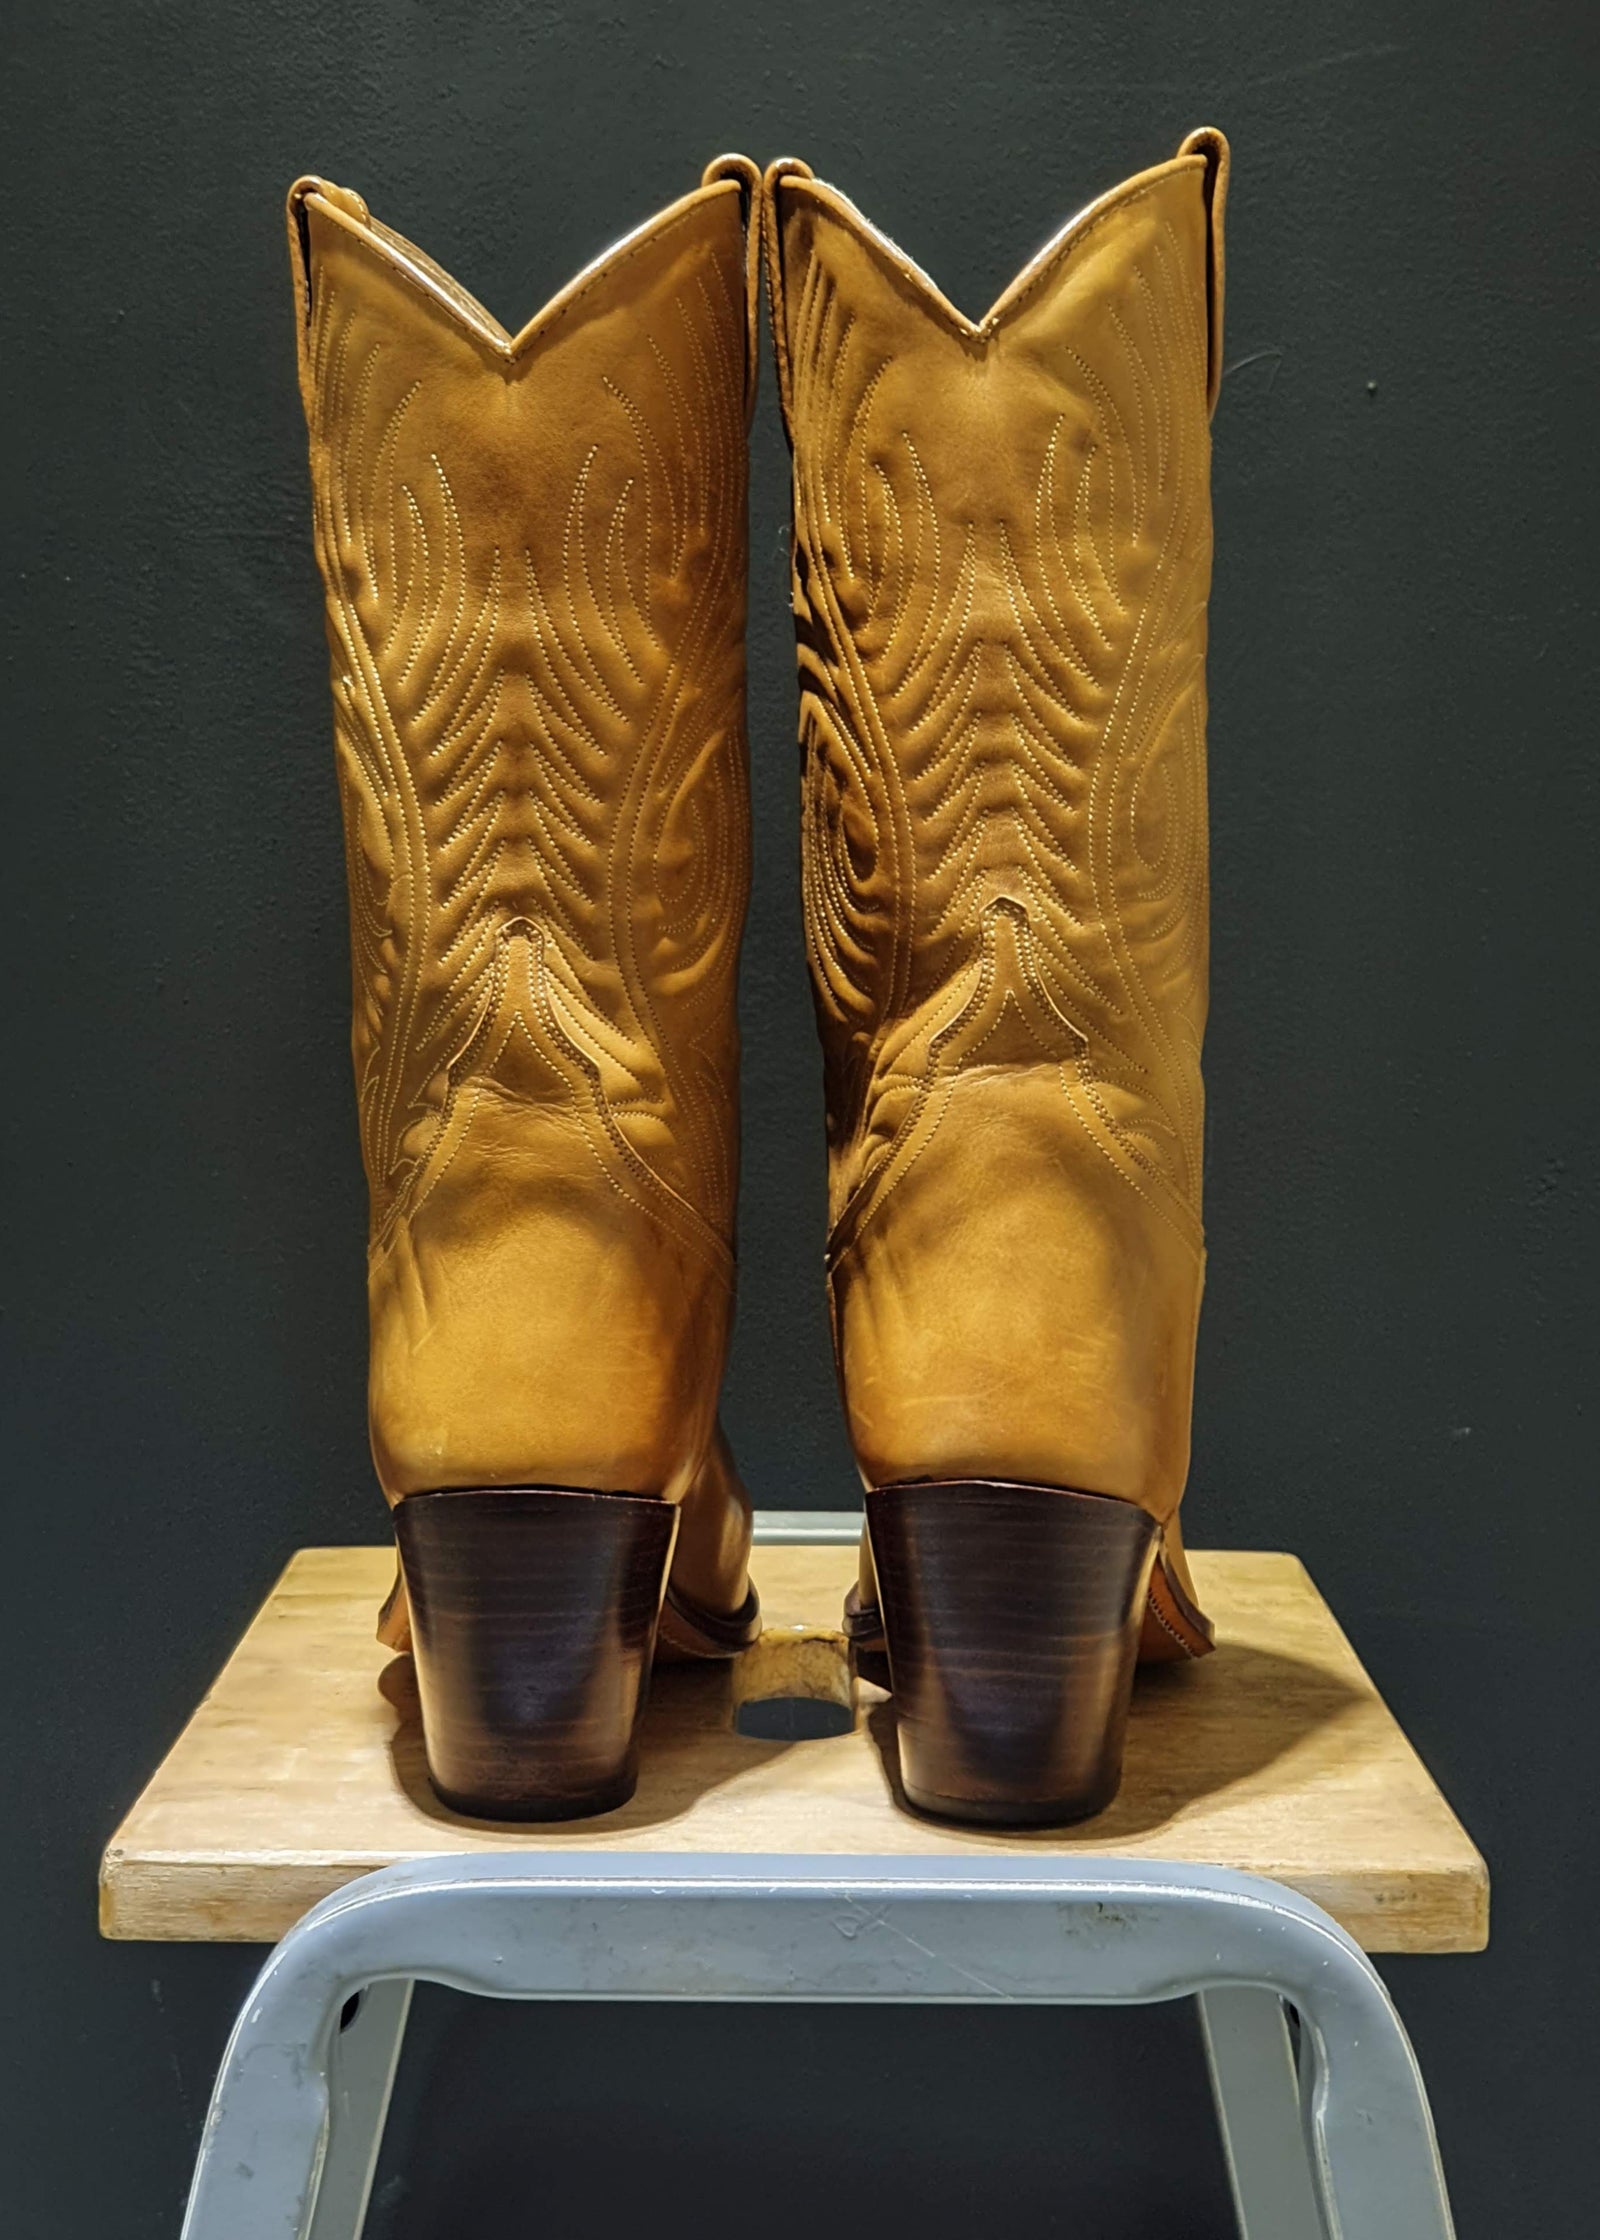 PREWORN | Preloved <br>'R.SOLES'  by Judy Rothchild - Tony Mora <br>Cowgirl Boots<br> Size 6 UK